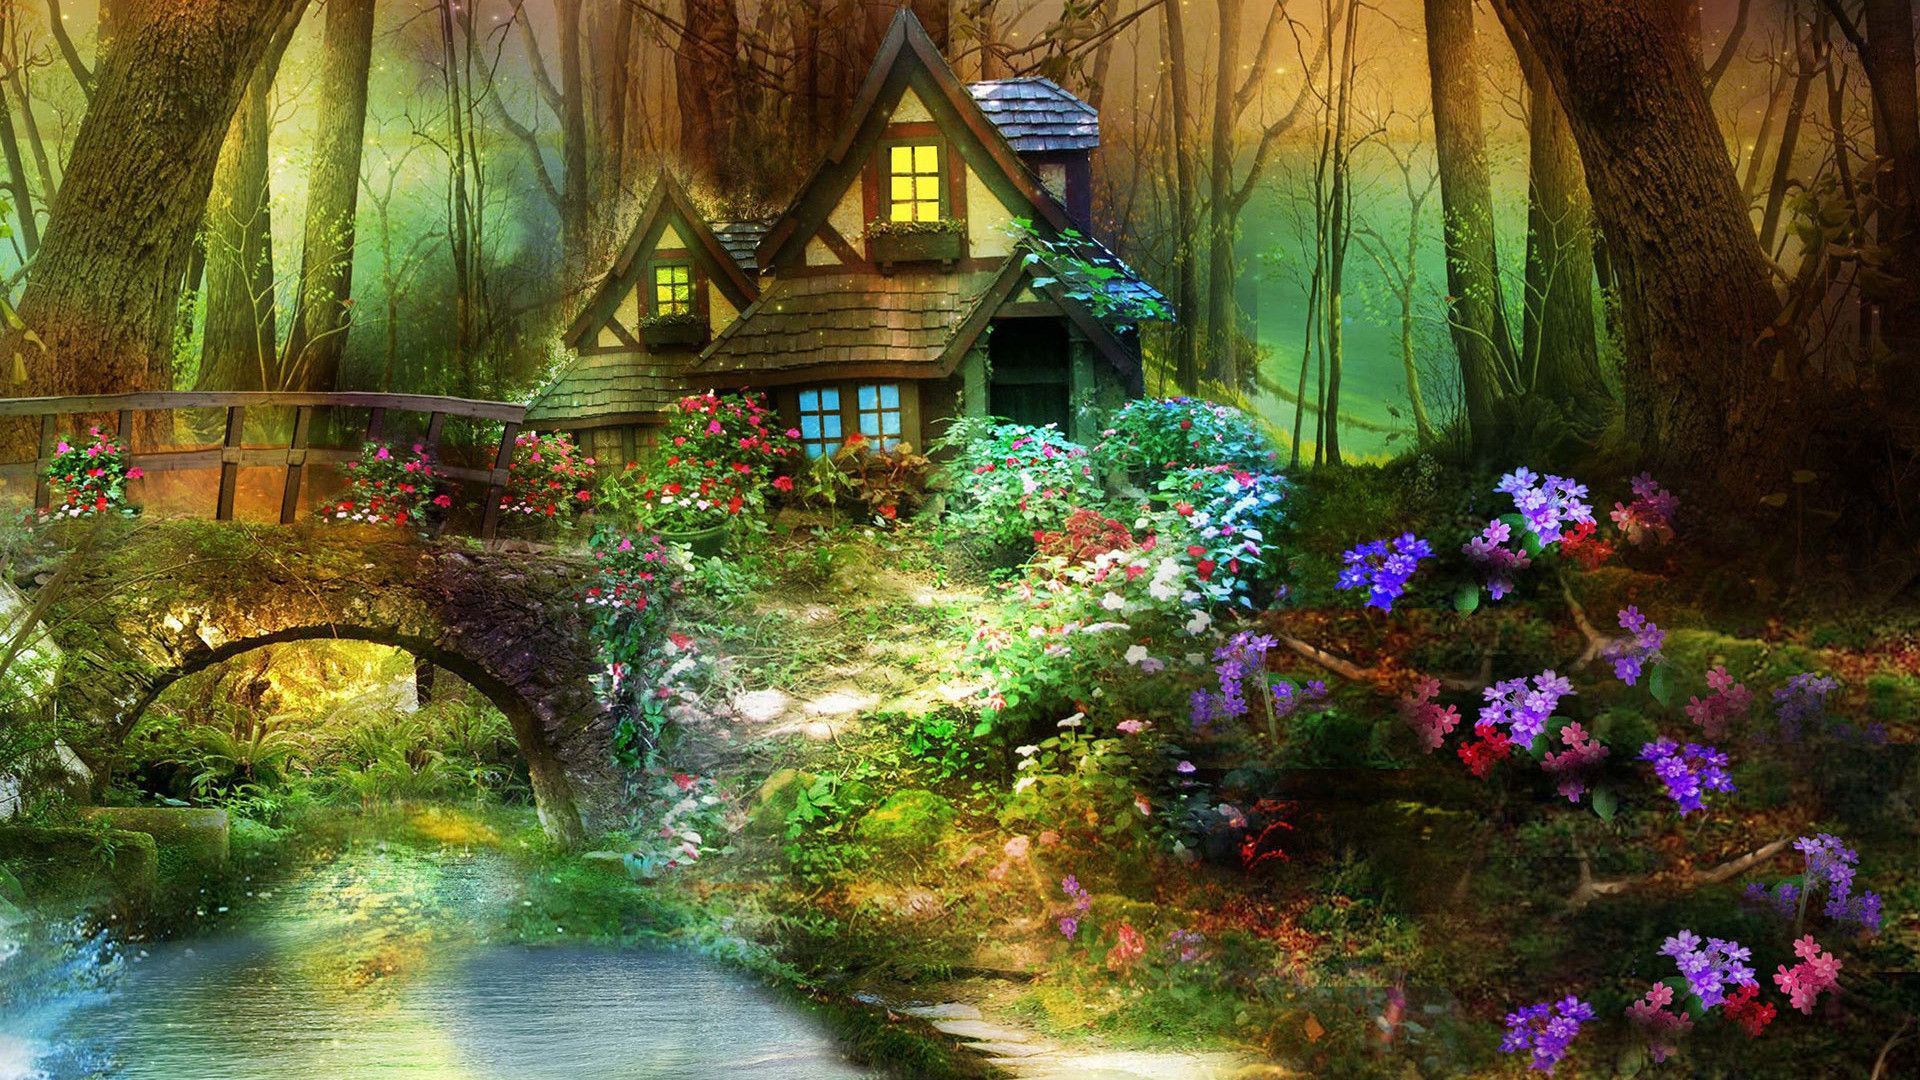 Enchanted Forest With Fairies Wallpapers